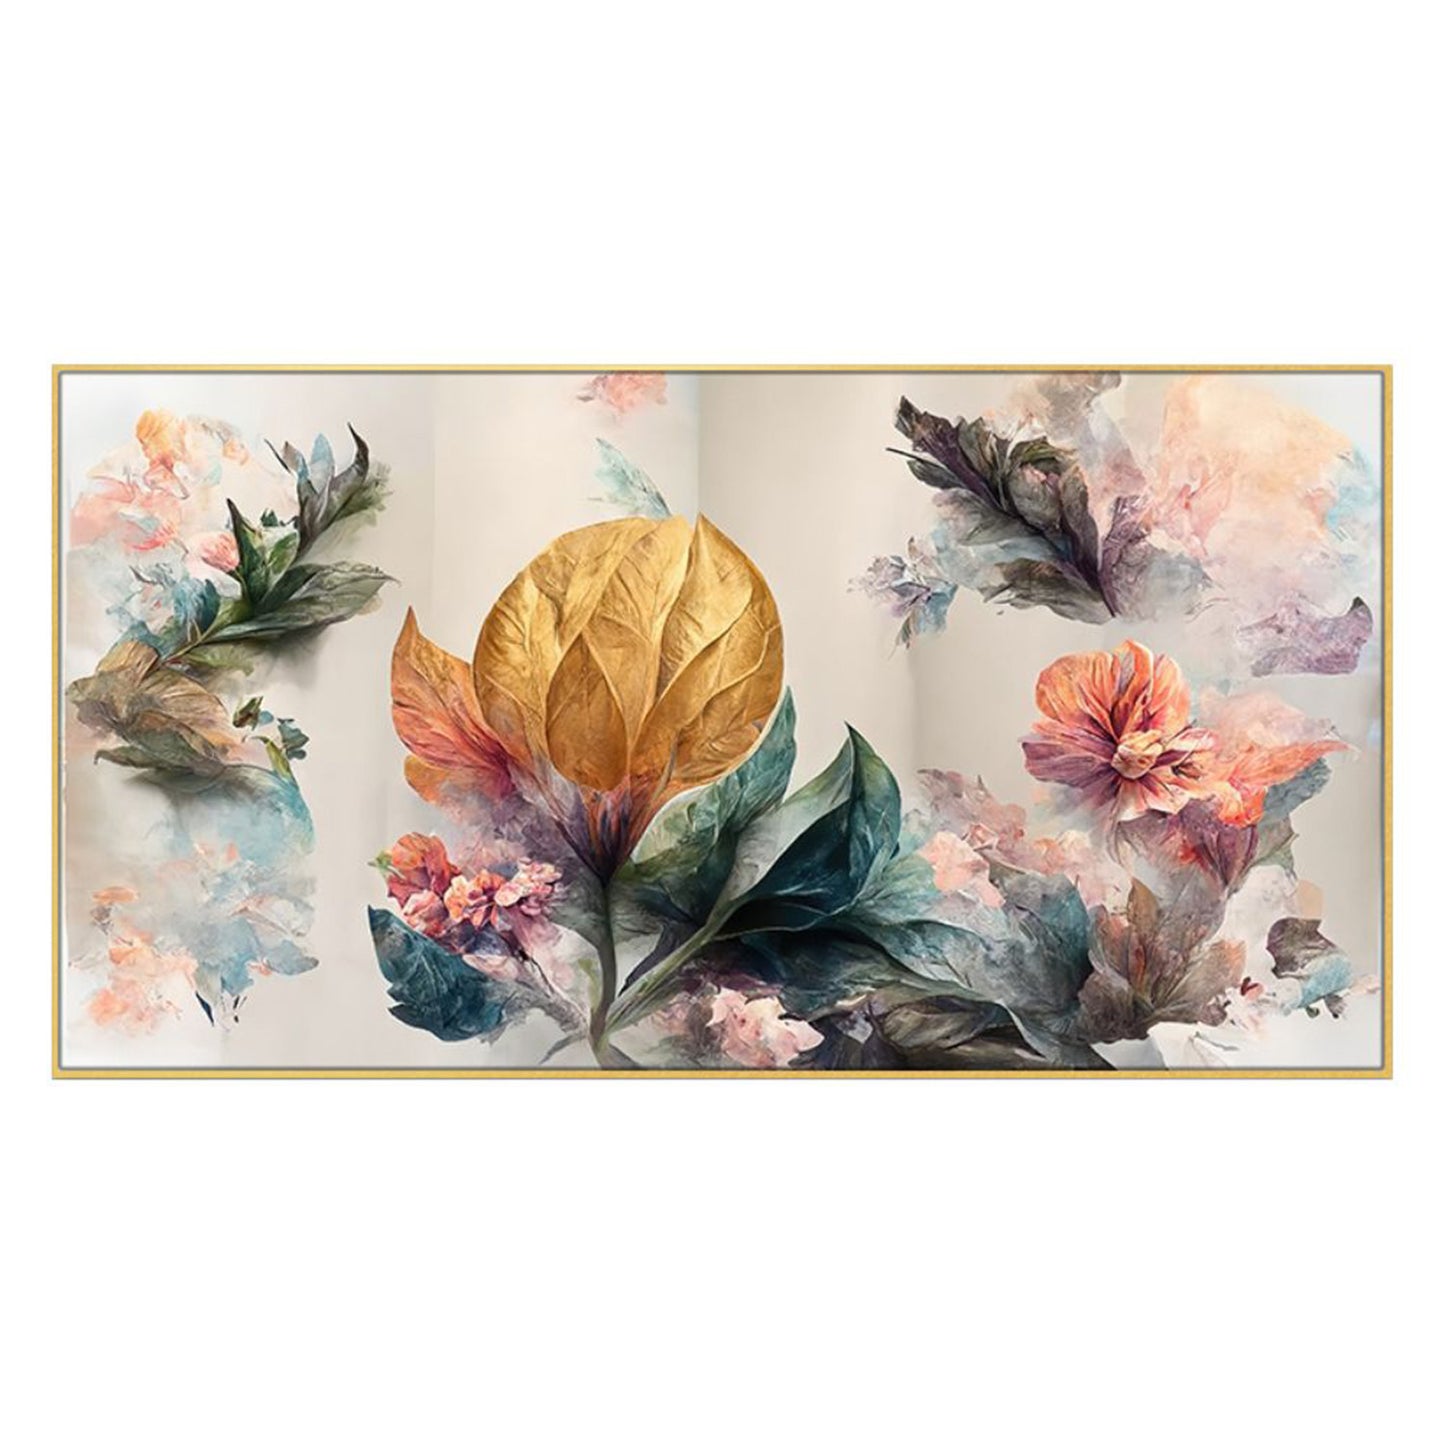 Captivating Floral Composition in Frame Wall Painting